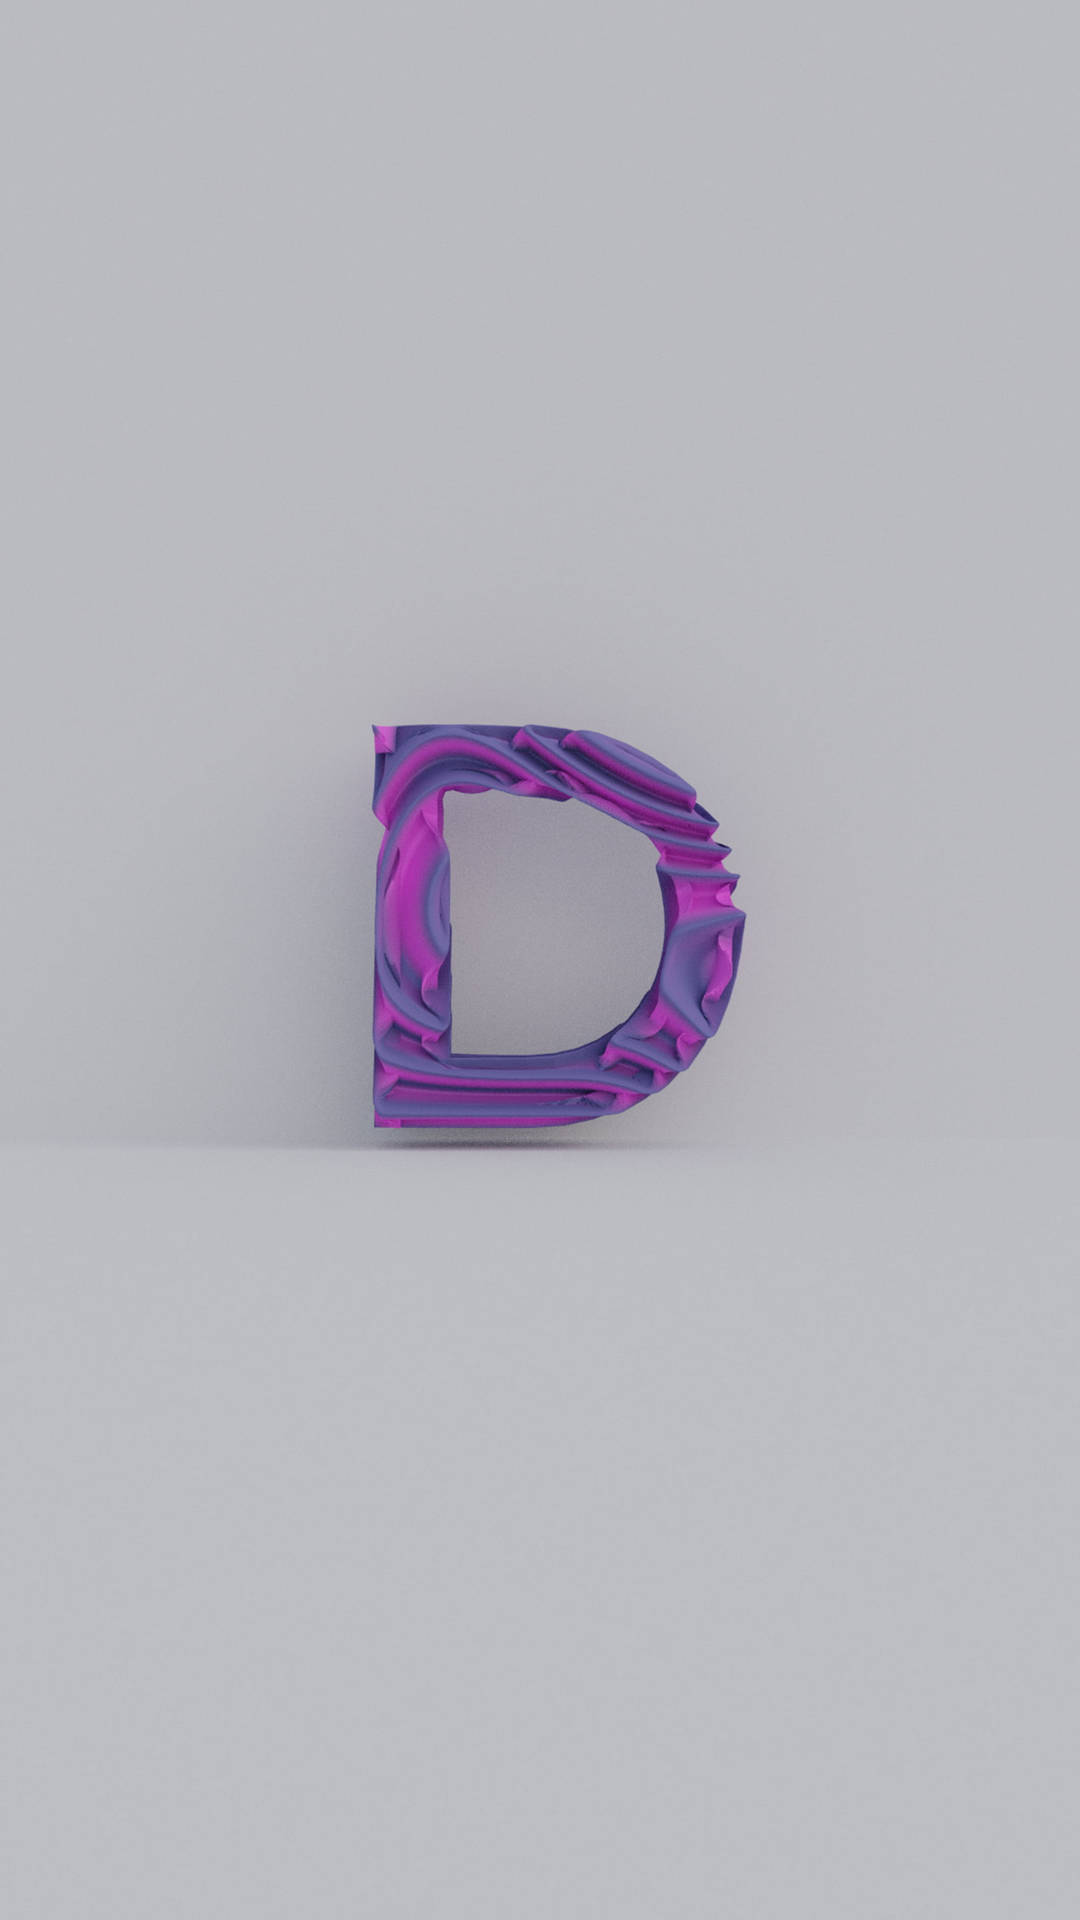 Textured 3d Letter D Phone Background